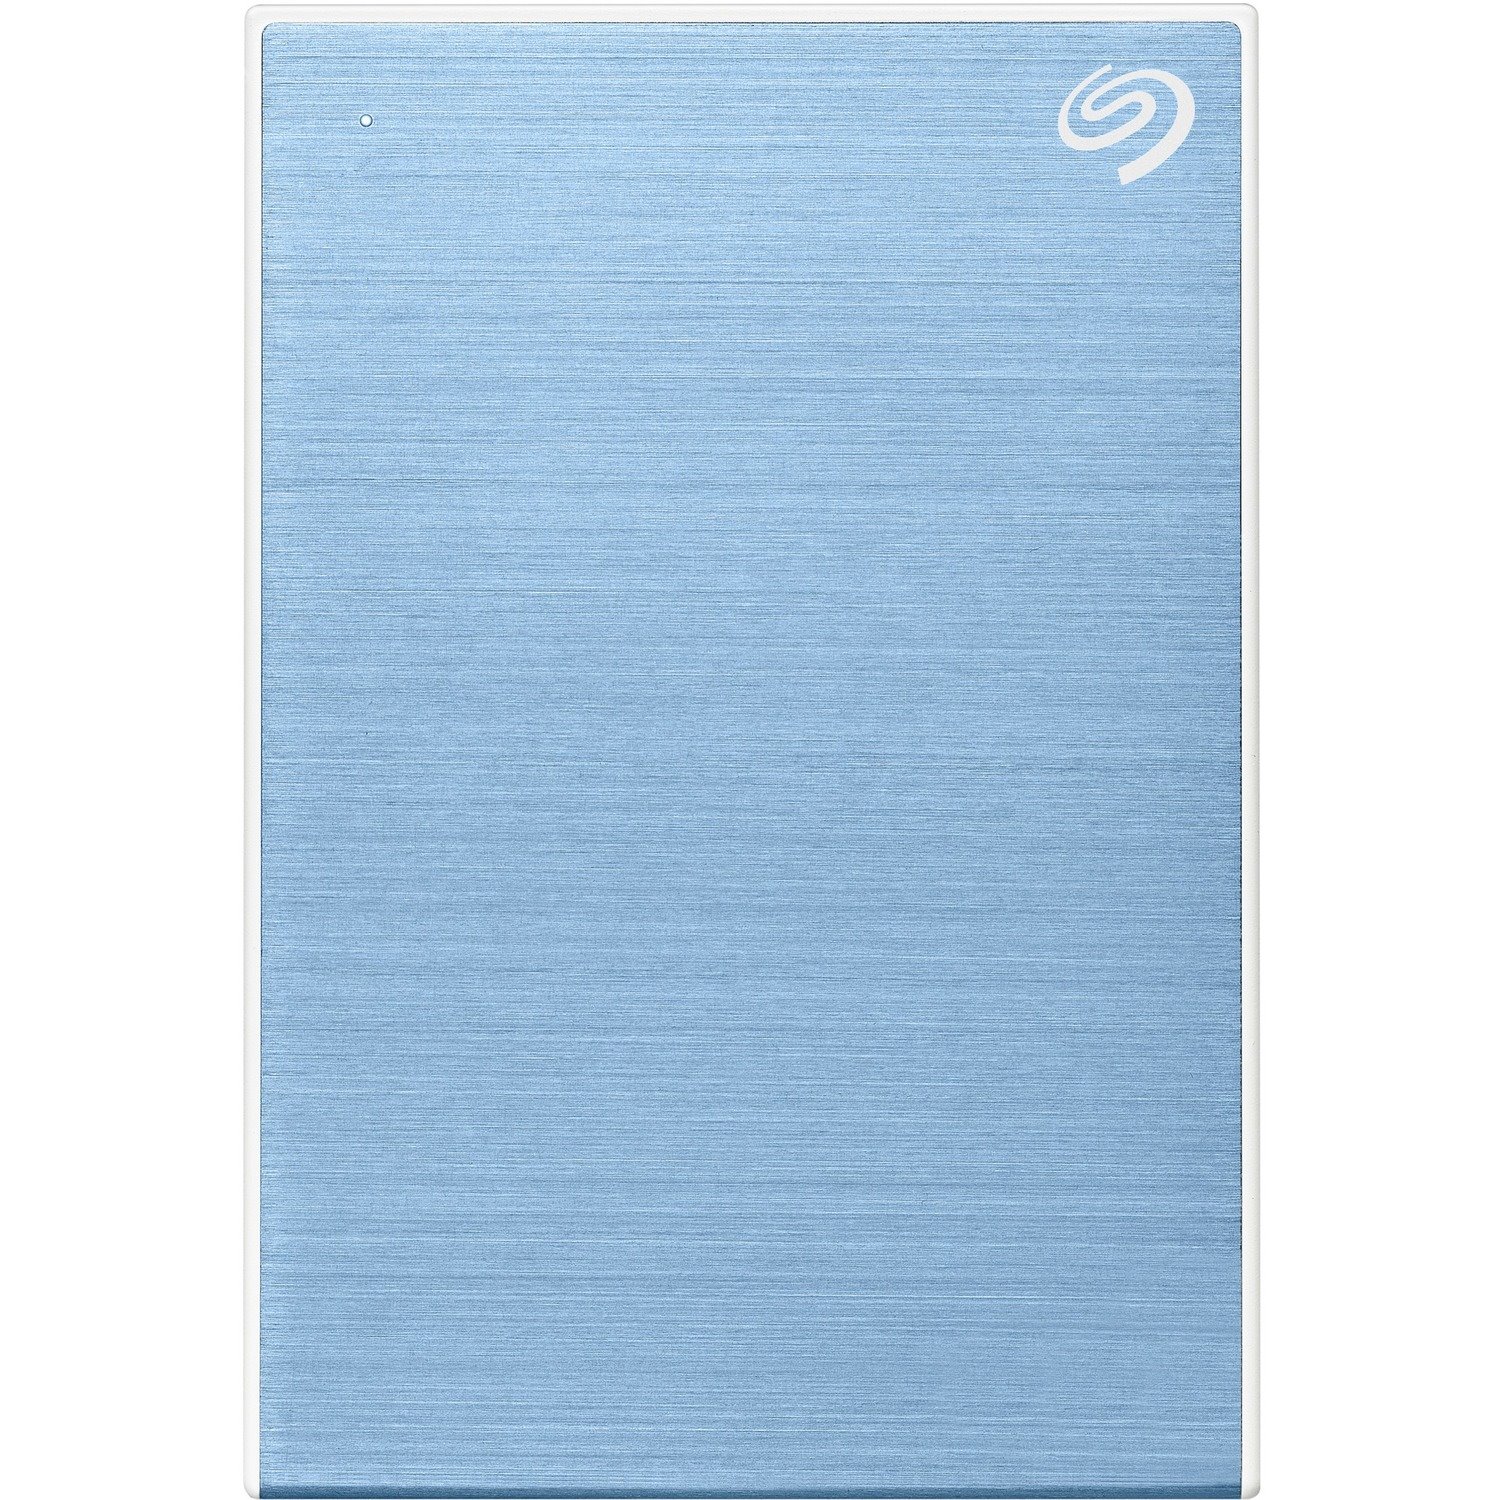 Seagate One Touch STKC4000402 4 TB Portable Hard Drive - 2.5" External - Light Blue